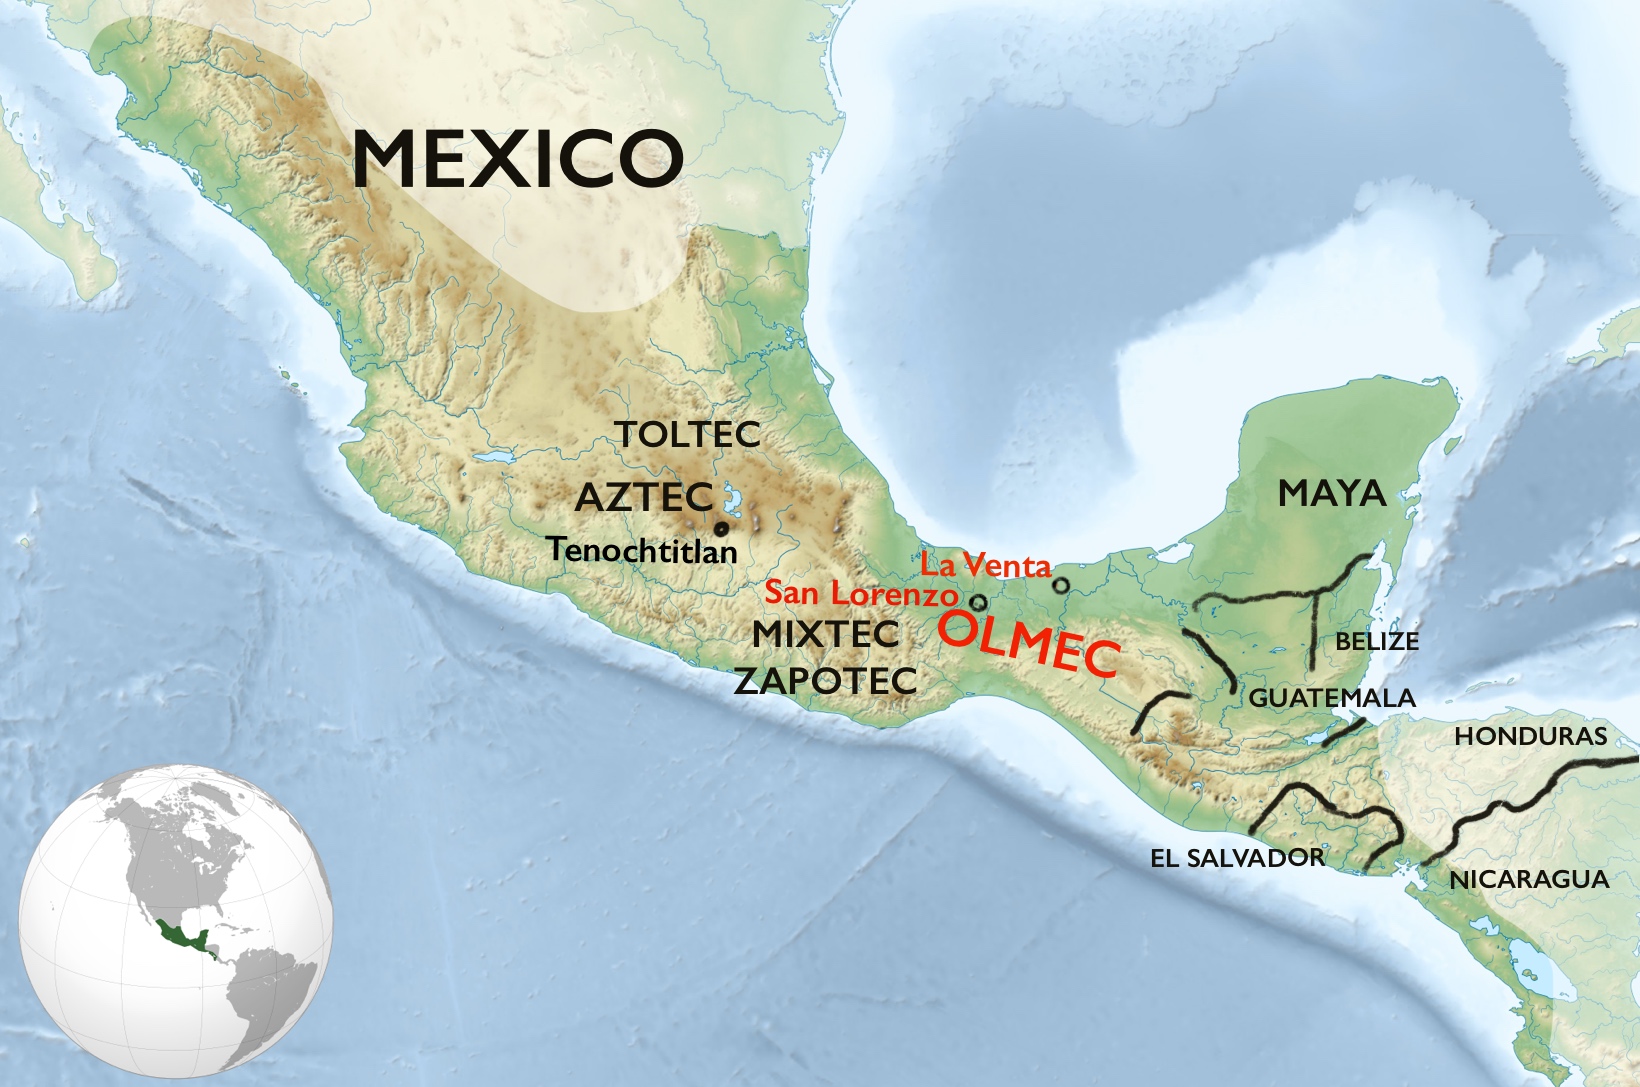 Map of Mesoamerica showing Olmec sites and selected other Mesoamerican cultures